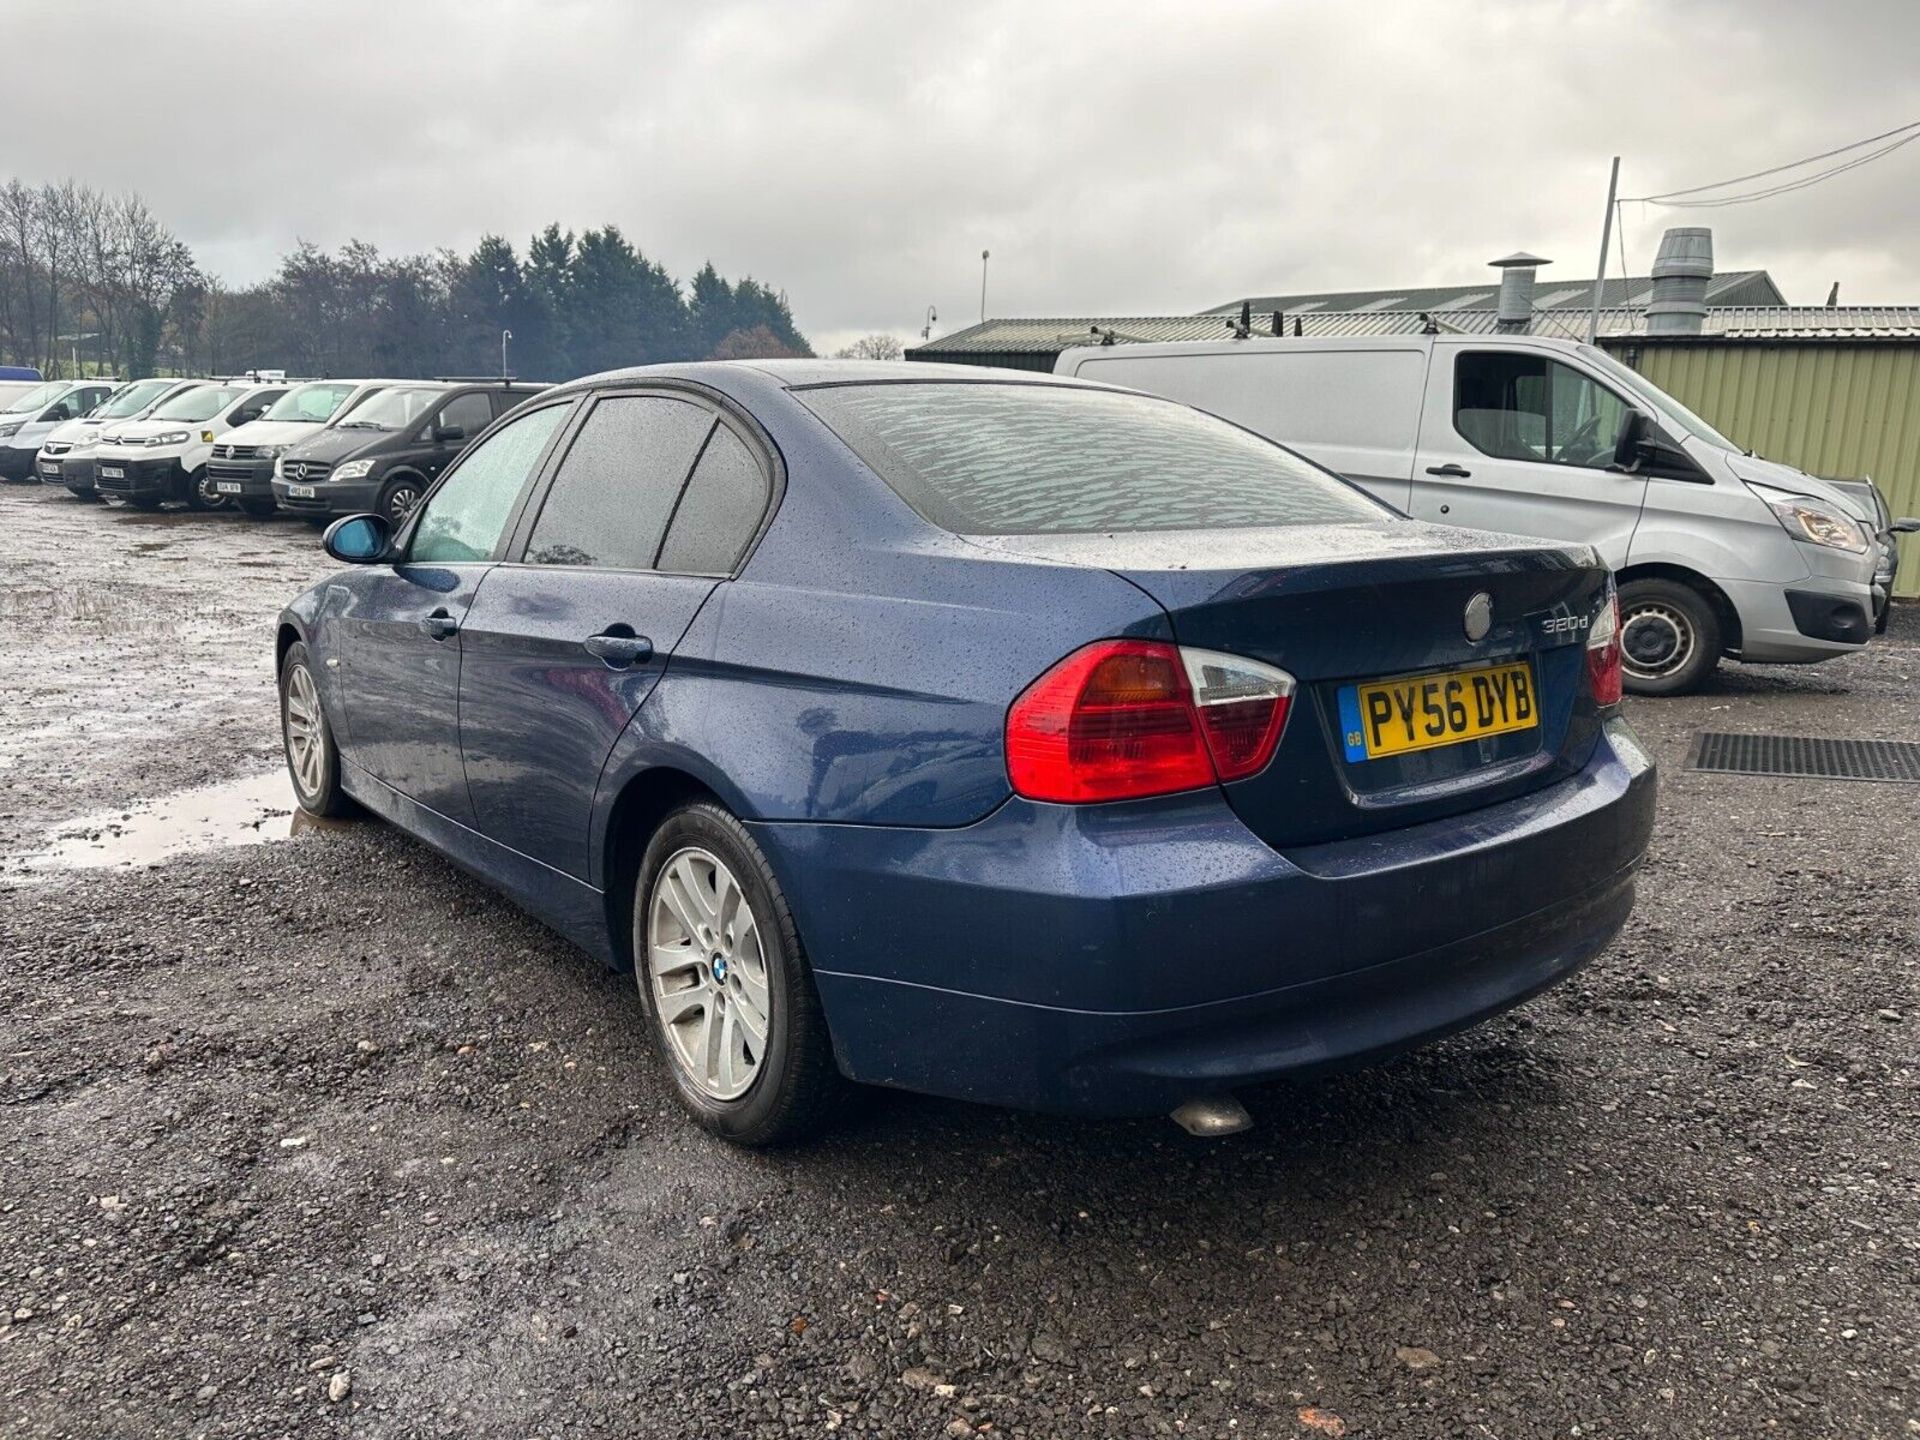 SMOOTH & CAPABLE: BMW 320D 3 SERIES 4DR SALOON - Image 14 of 17